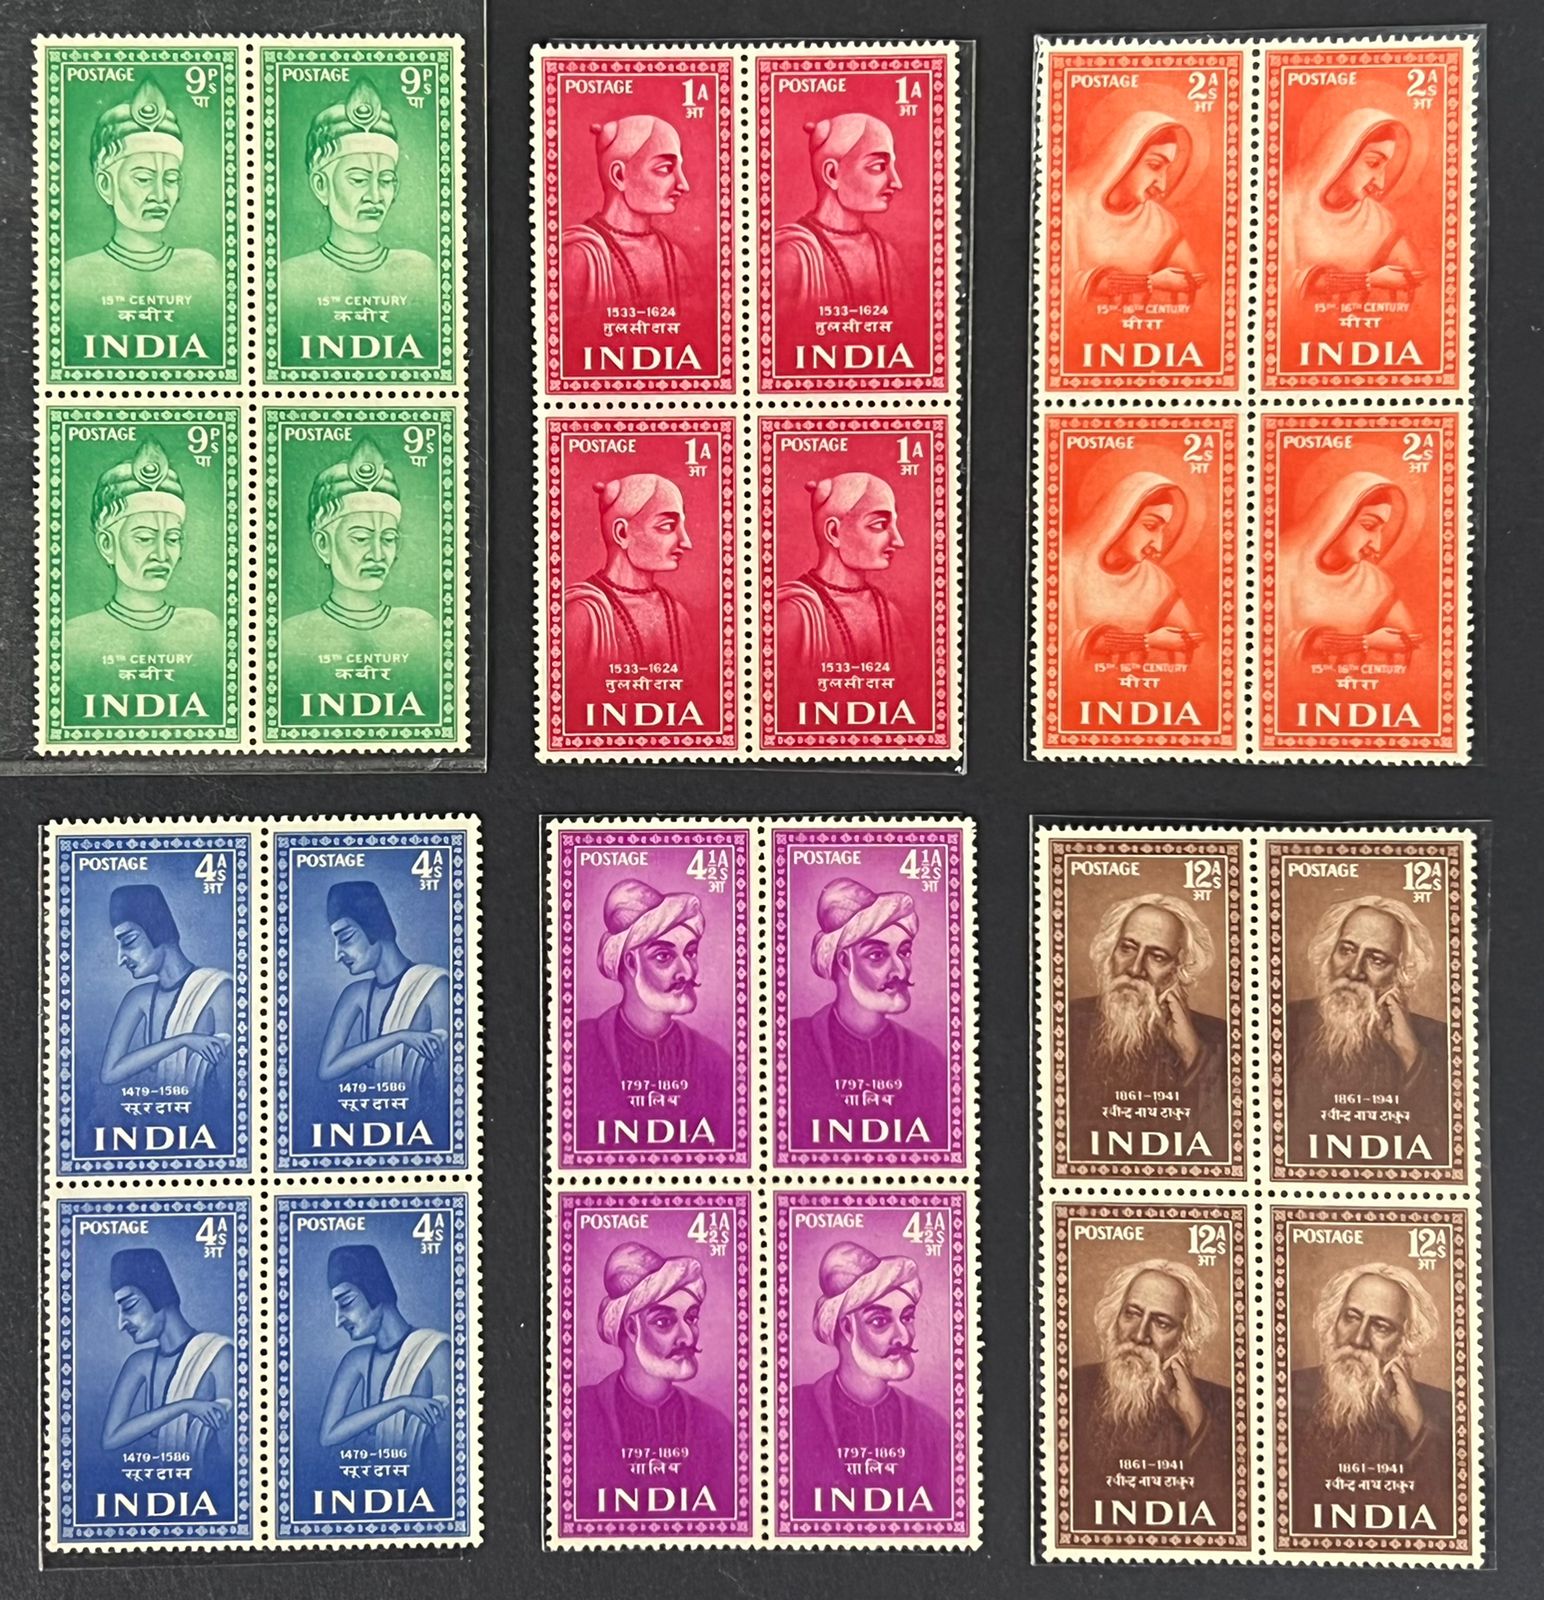 India 1952 Poets Year Set Complete Blocks of 4 MNH White Gum Phil Cat